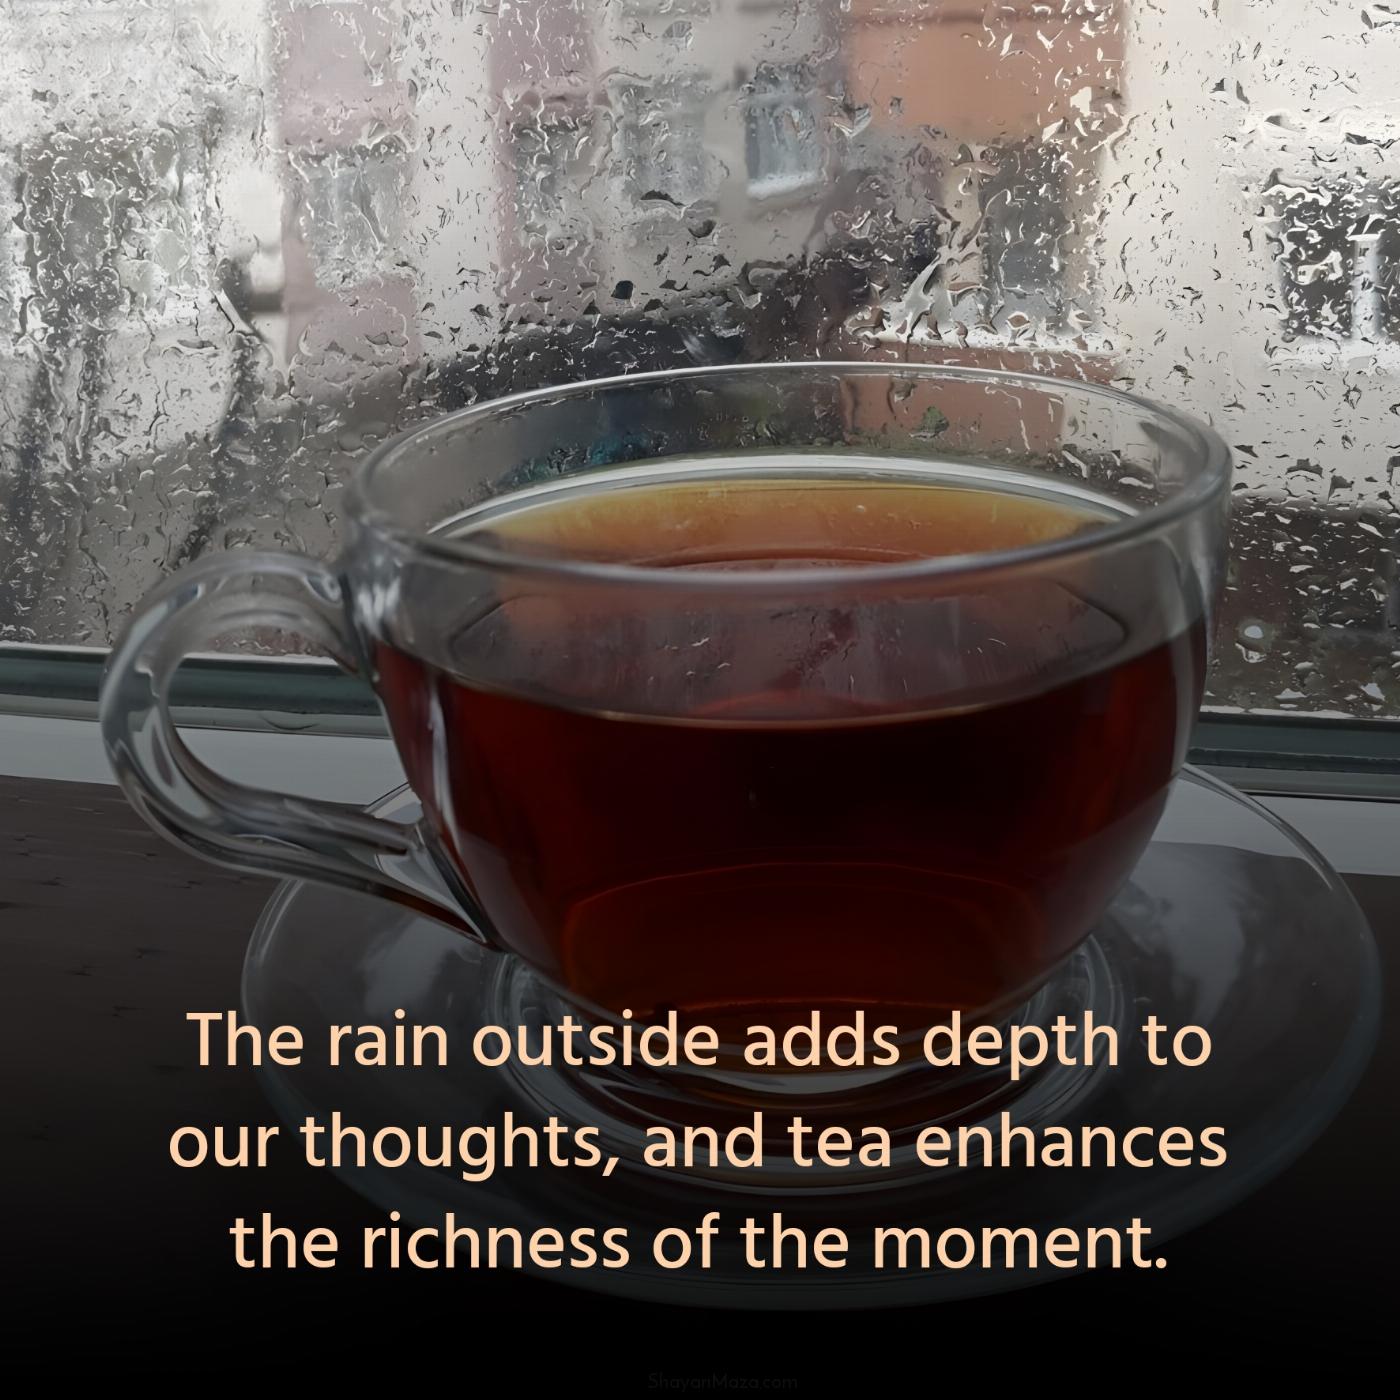 The rain outside adds depth to our thoughts and tea enhances the richness